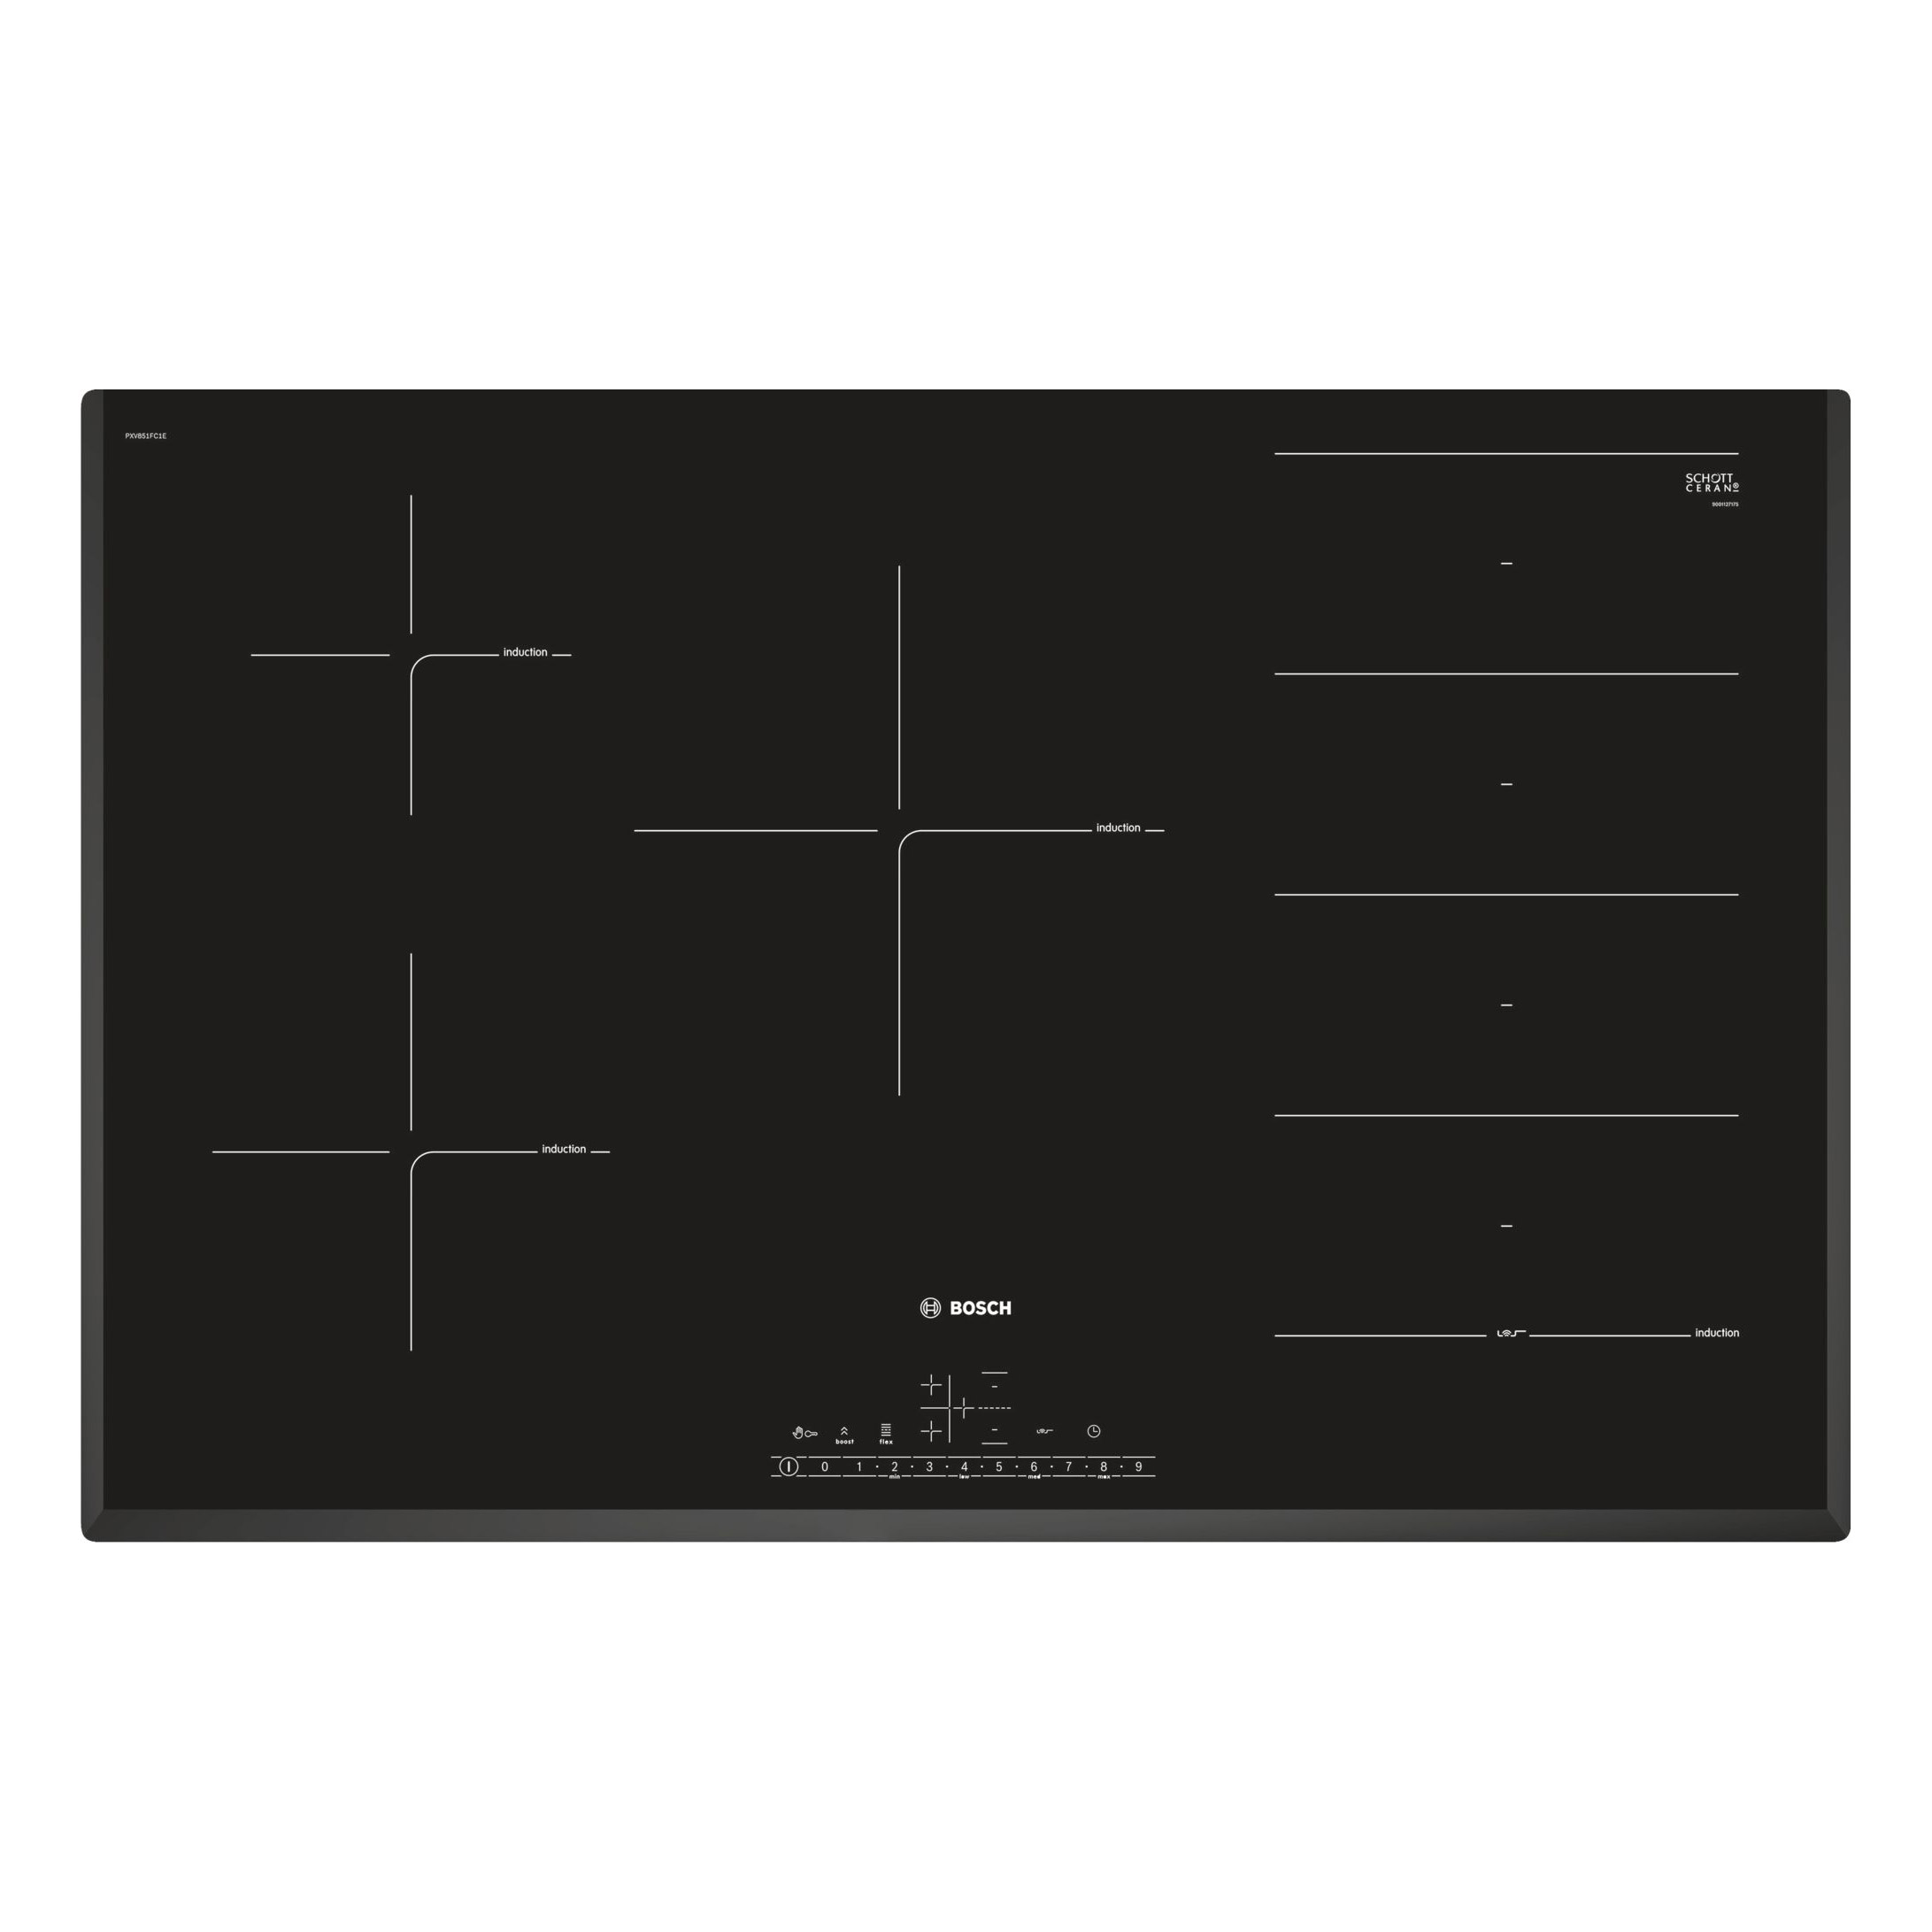 Image of Bosch PXV851FC1E Series 6 80cm 5 Zone Induction Hob in Black Glass